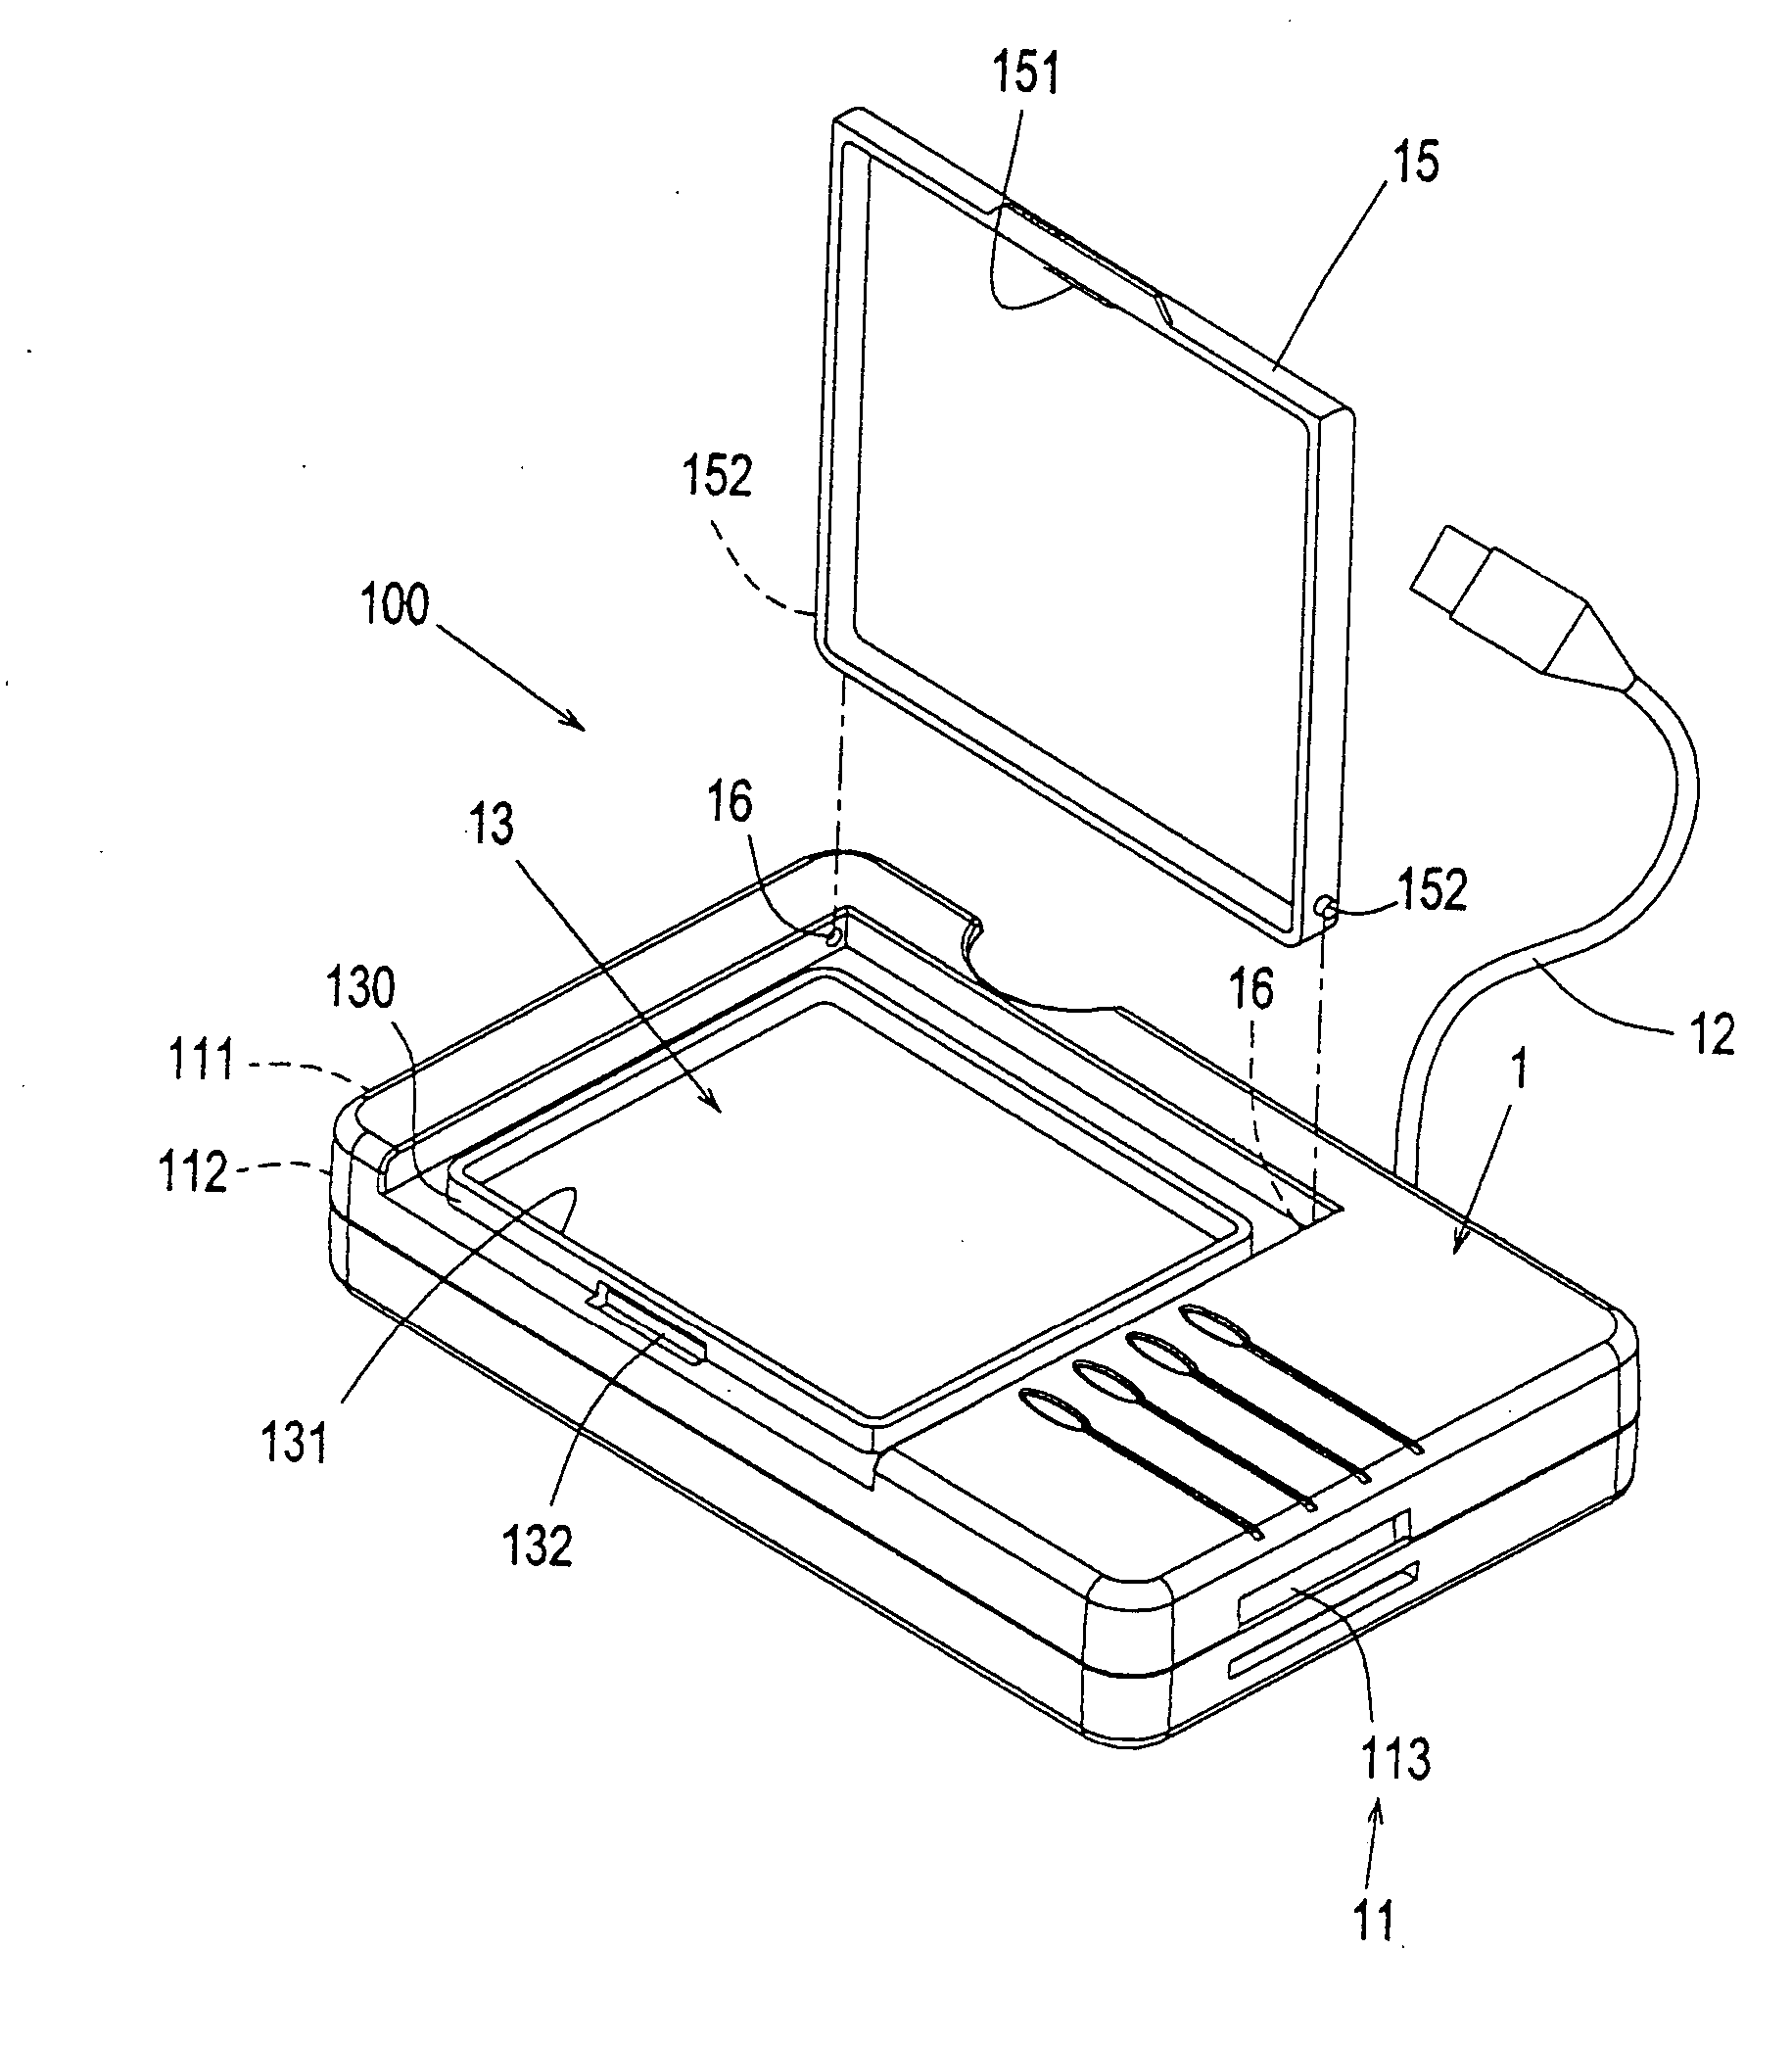 Memory card reader with a chamber for receiving memory card(s)